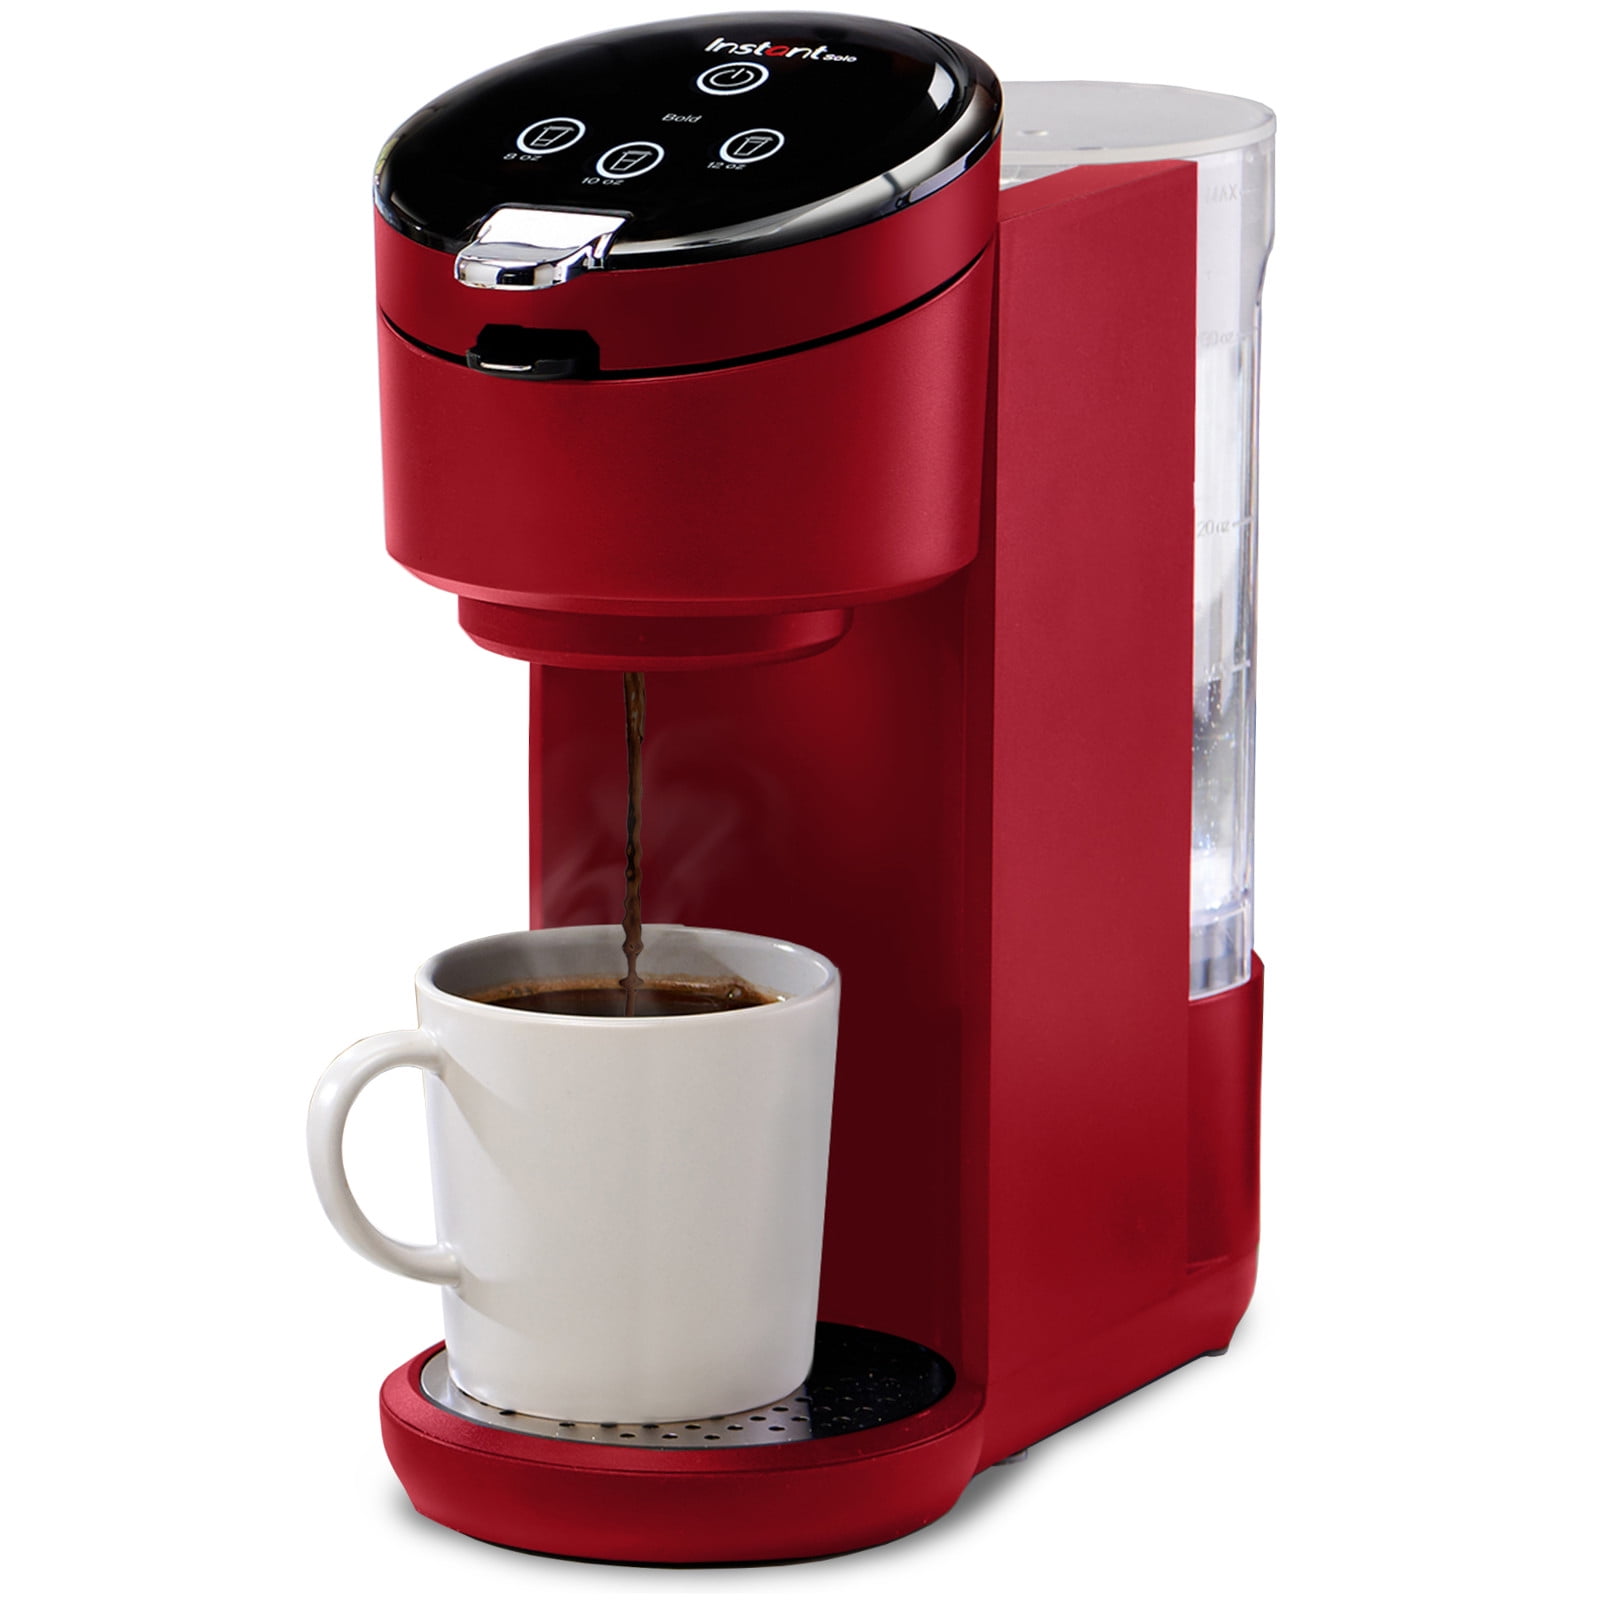 Instant Solo 2-in-1 Single Serve Coffee Maker for Ground Coffee or K-Cup  Pods with 3 Brew Sizes, Pink